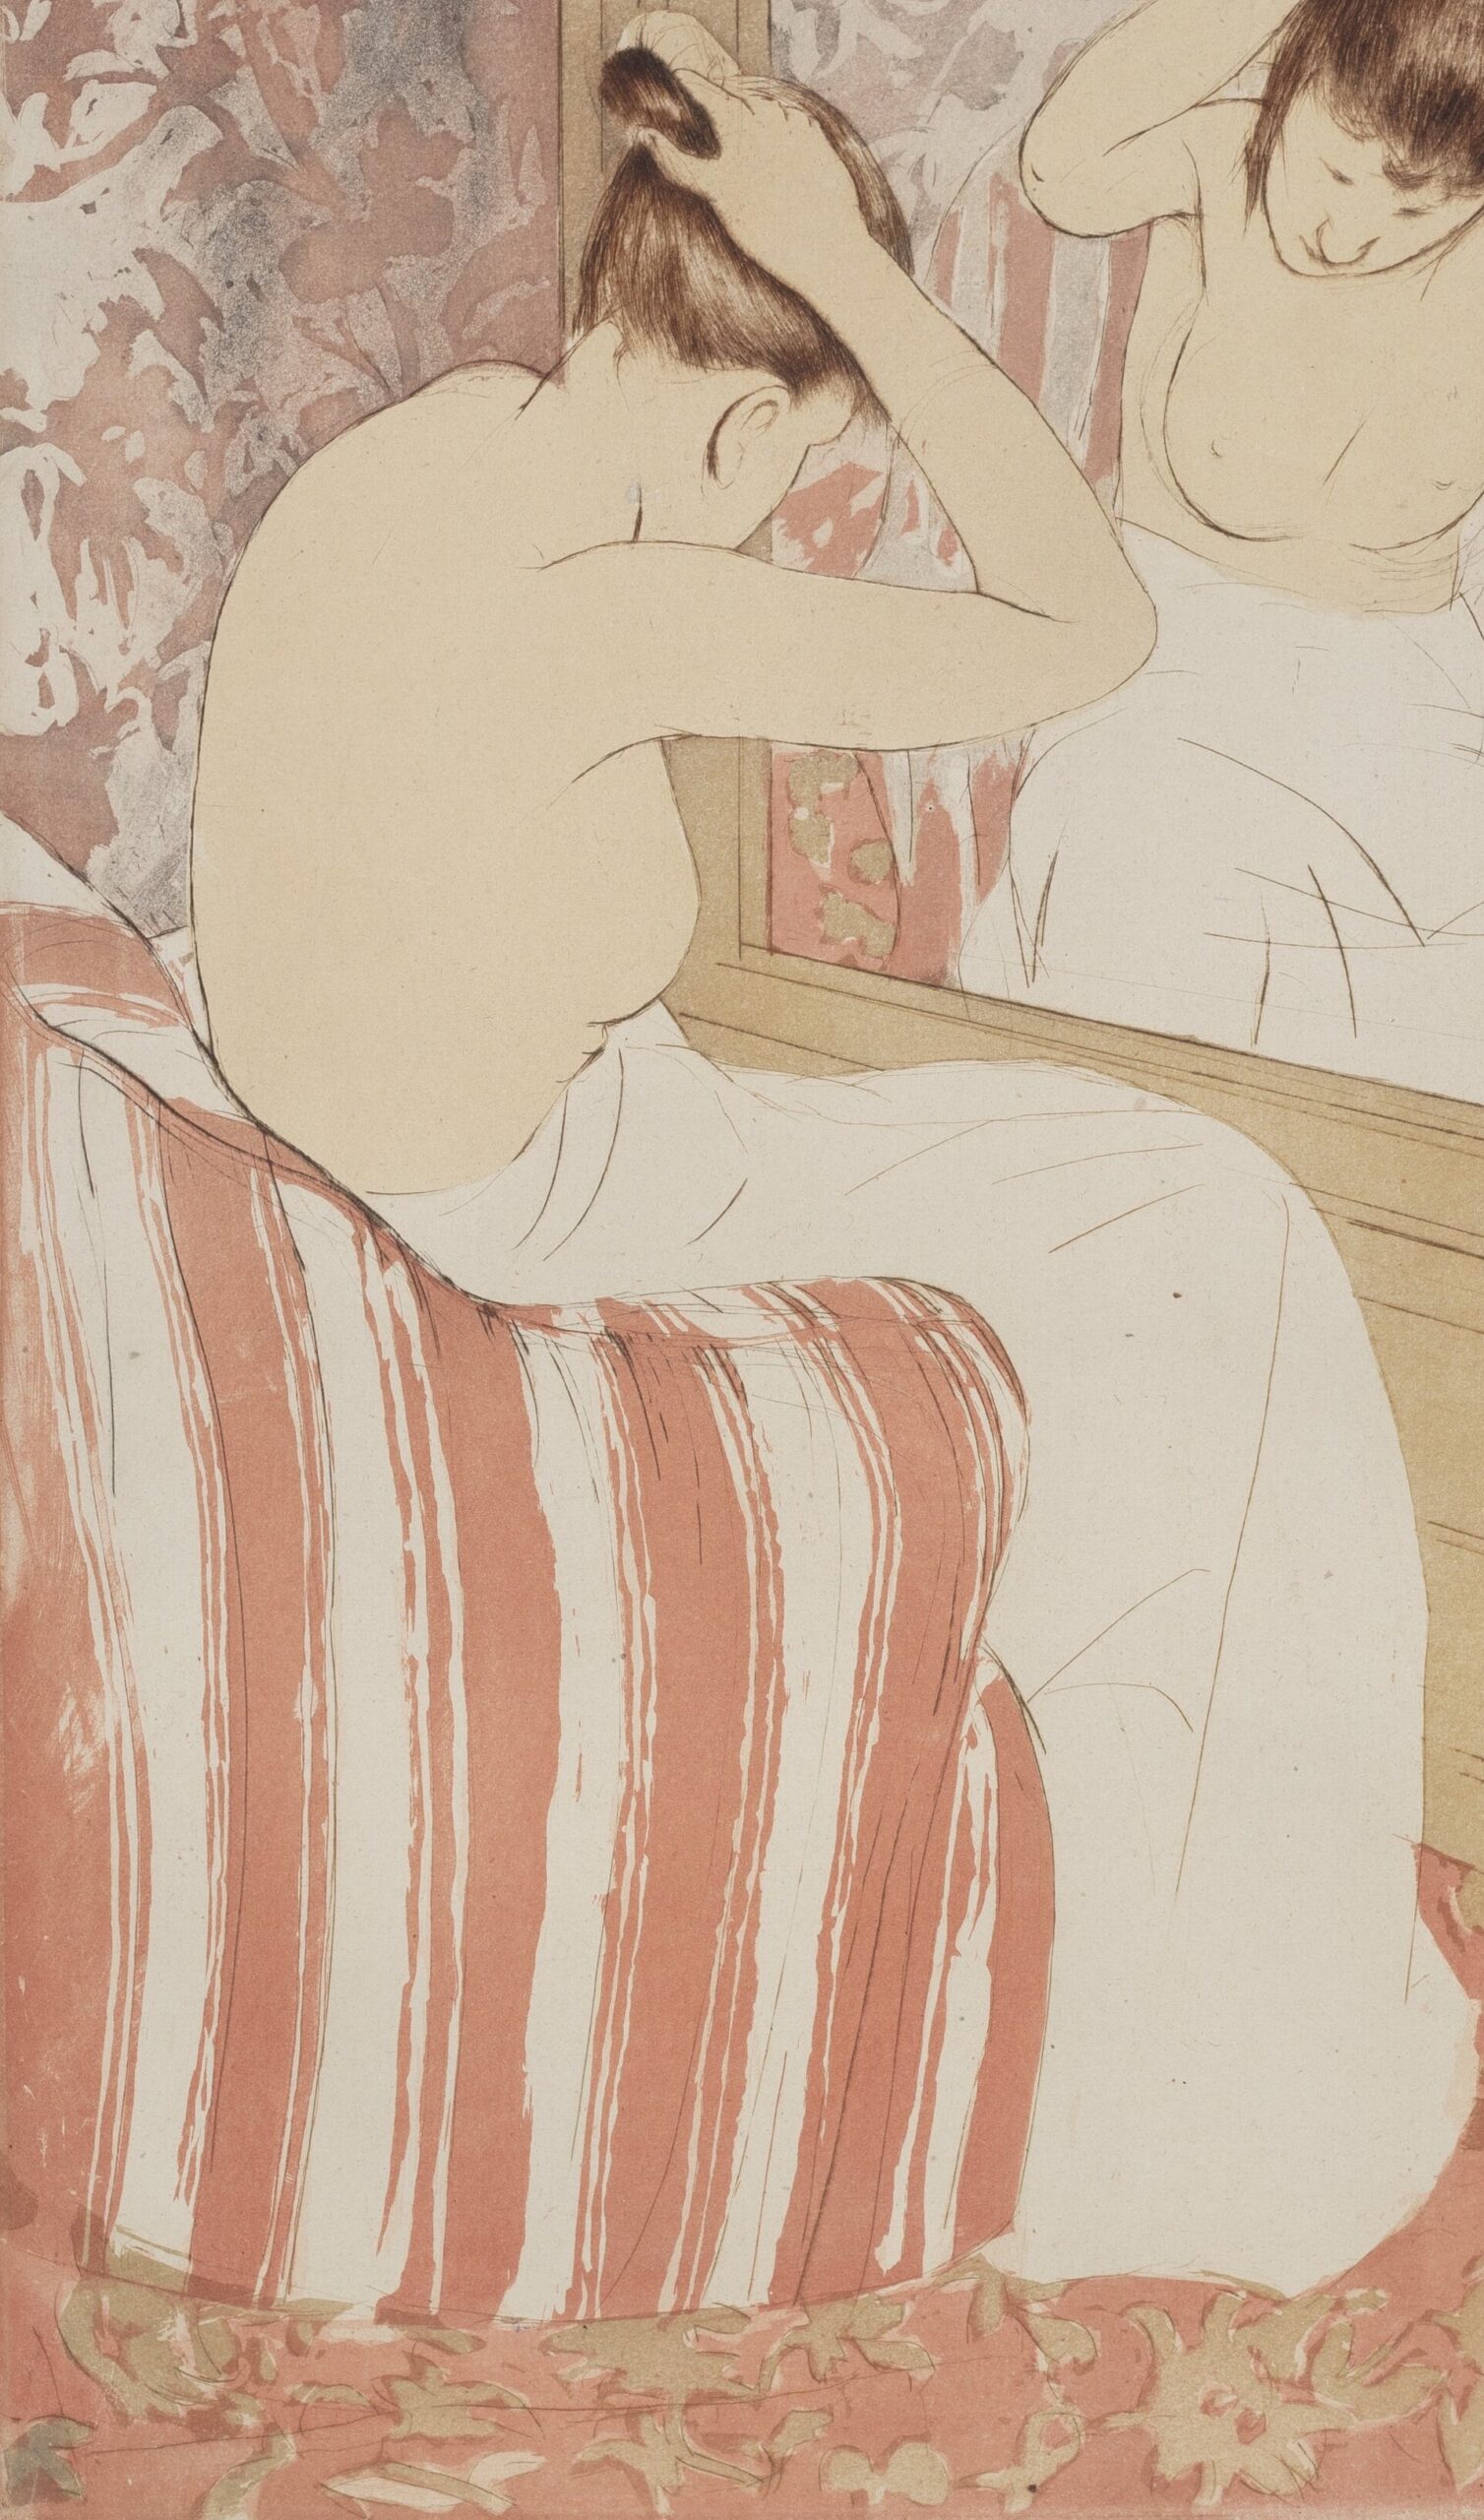 Woman (detail), Mary Cassatt, The Coiffure, 1890–91, color drypoint and aquatint on laid paper, 43.2 x 30.7 cm (National Gallery of Art, Washington, D.C.)